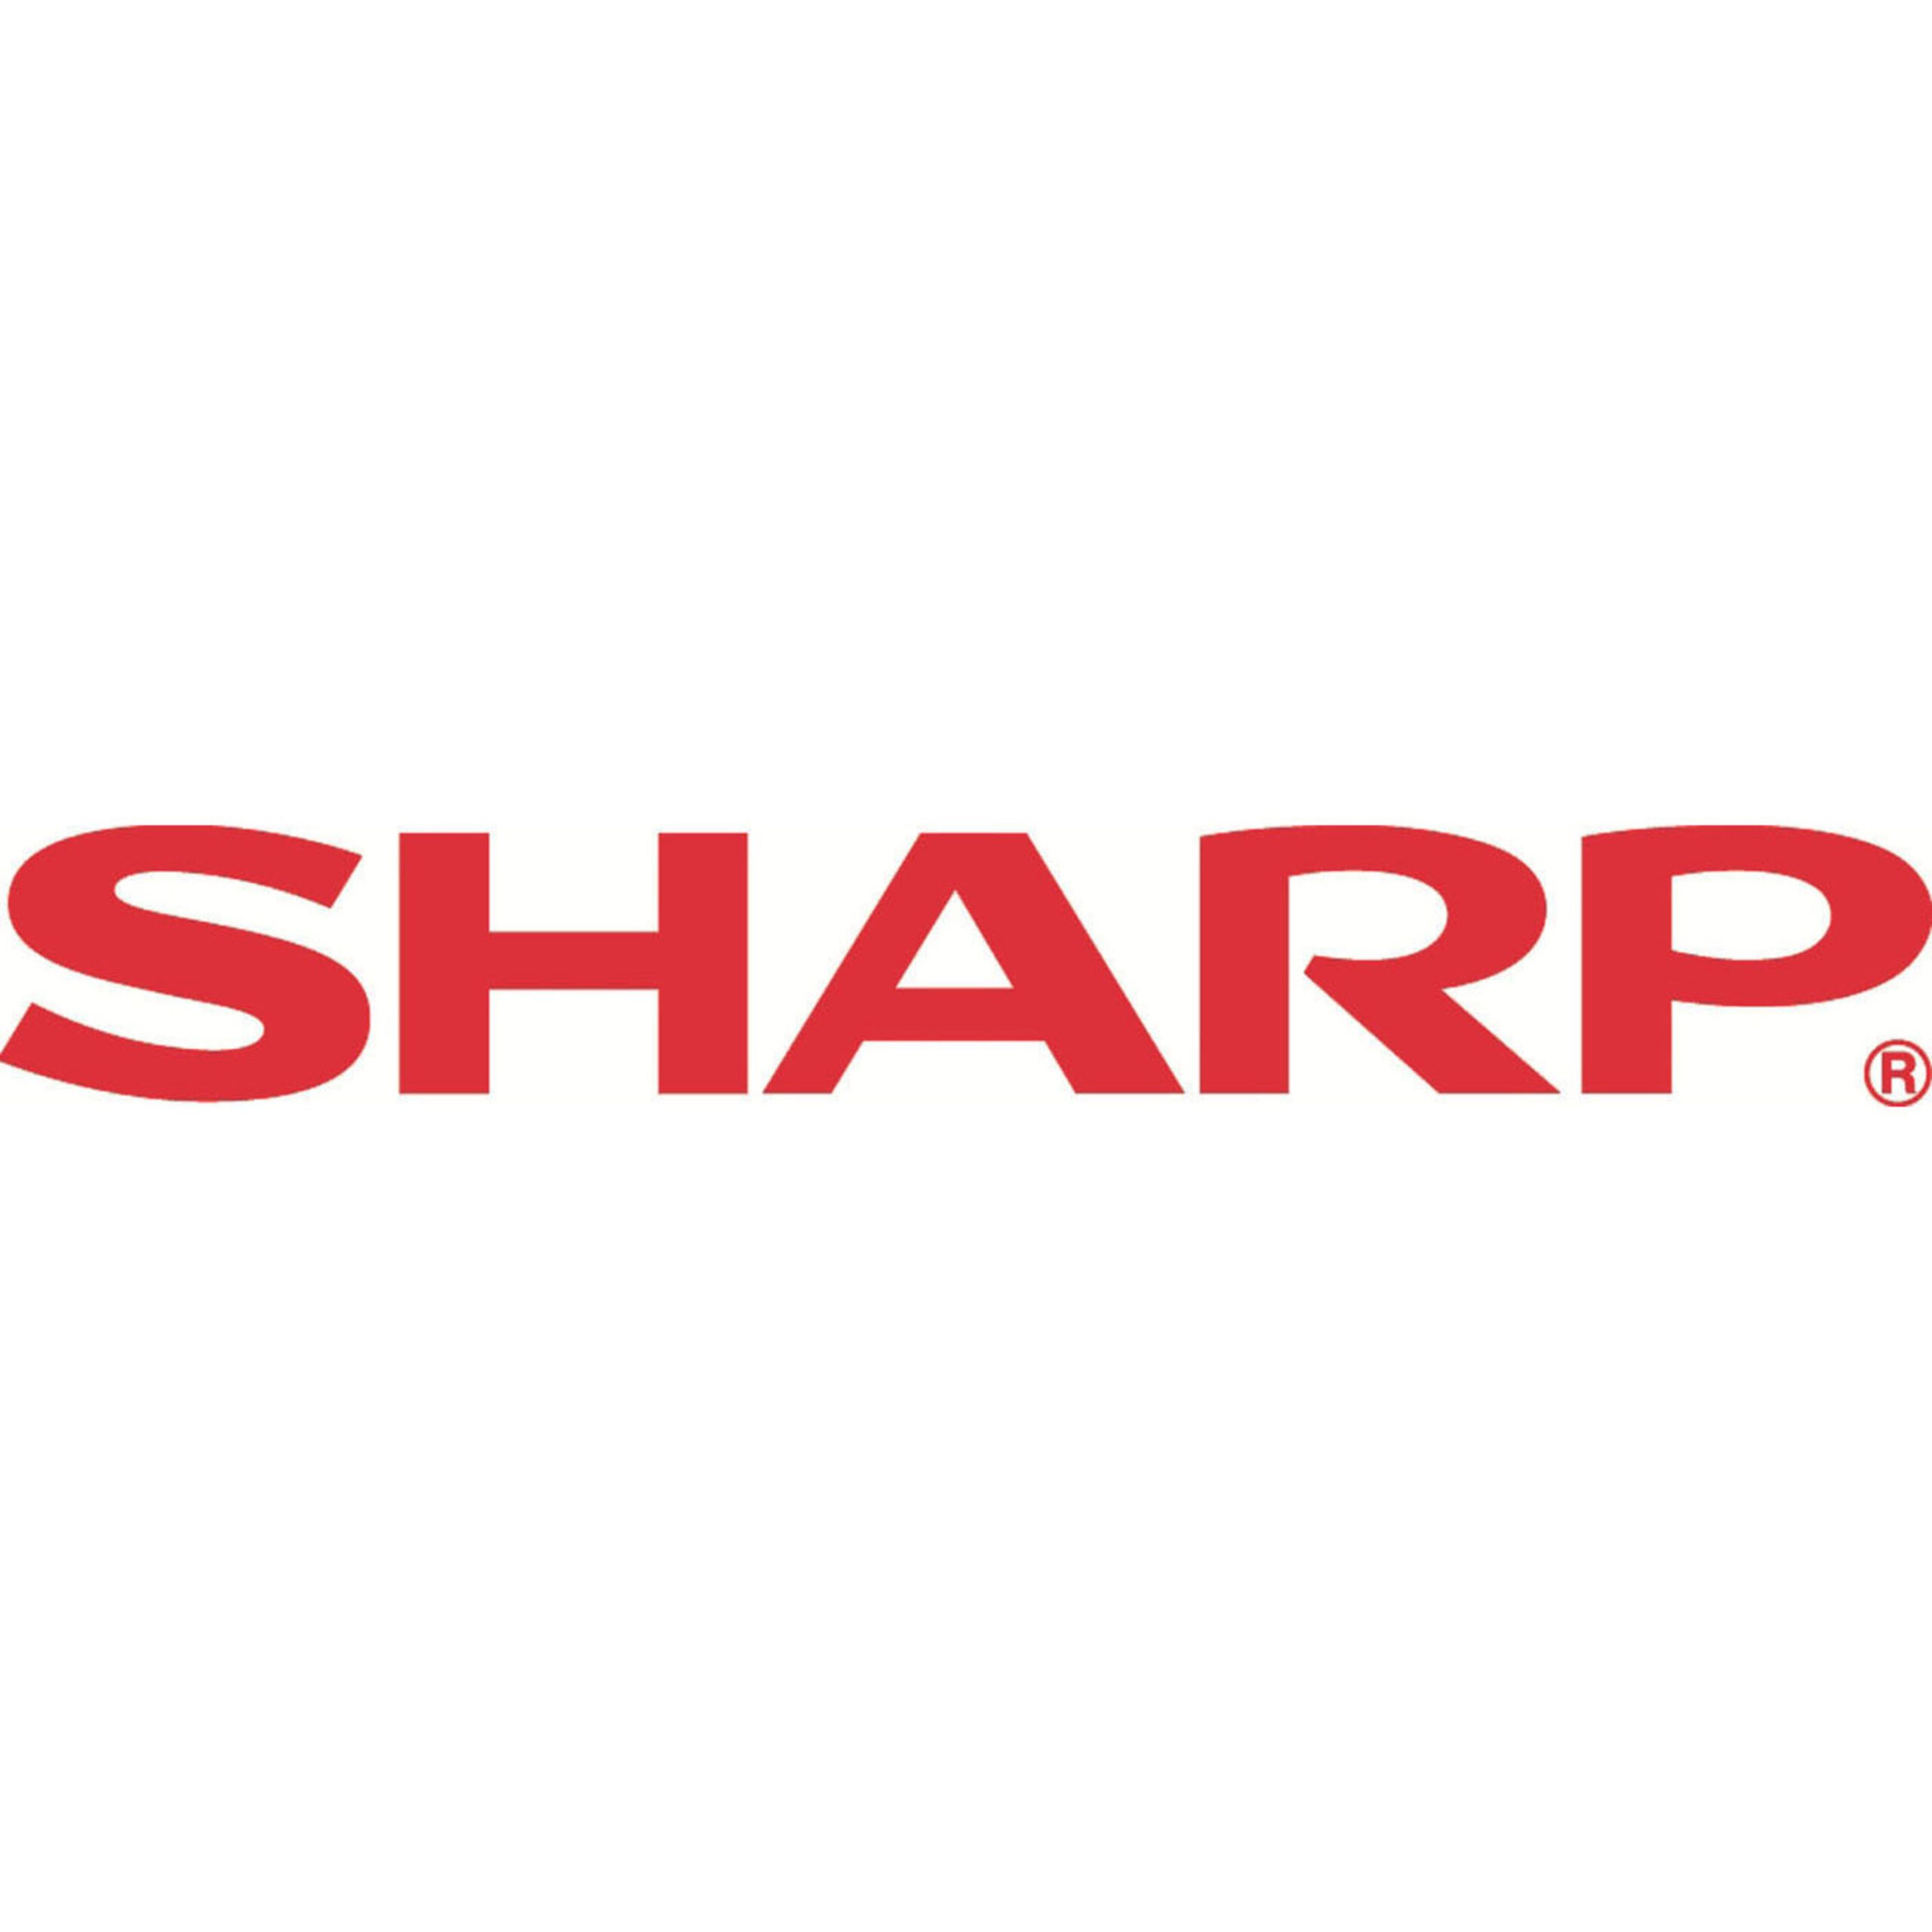 SHARP 110 Years Journey of innovations and Exclusivity.